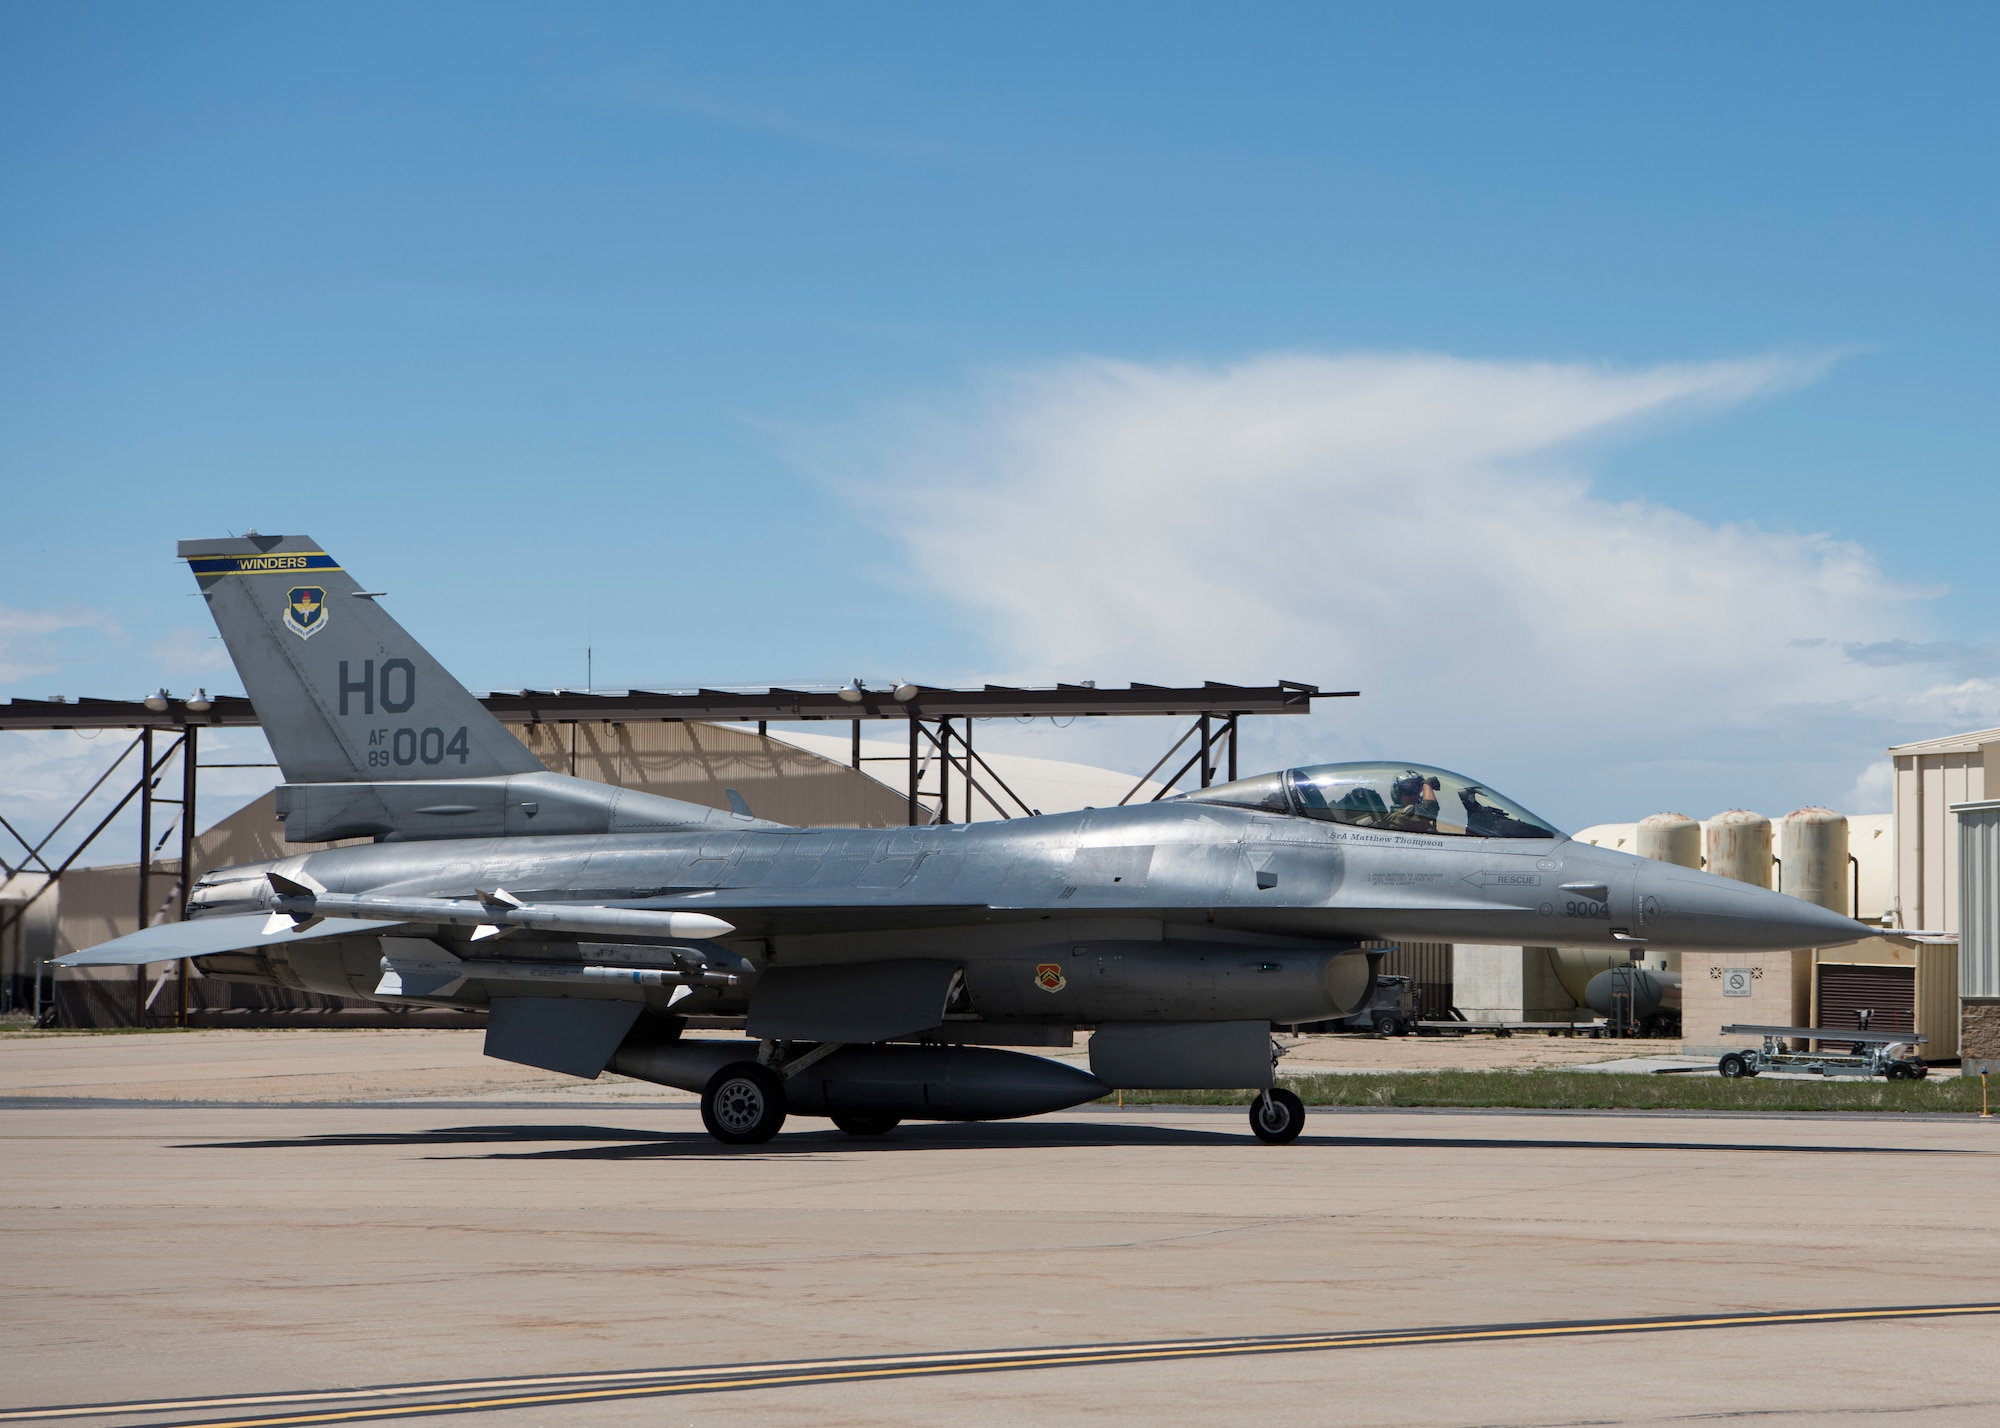 A 311th Viper F-16 Viper pilot displays the squadron “Fangs Out” symbol while taxiing, April 24, 2019, on Hill Air Force Base, Utah. The 311th FS brought 16 F-16 D-models to provide Familiarization Flights to 40 operations and maintenance personnel during exercise Viper Venom 19-01. (U.S. Air Force photo by Staff Sgt. BreeAnn Sachs)